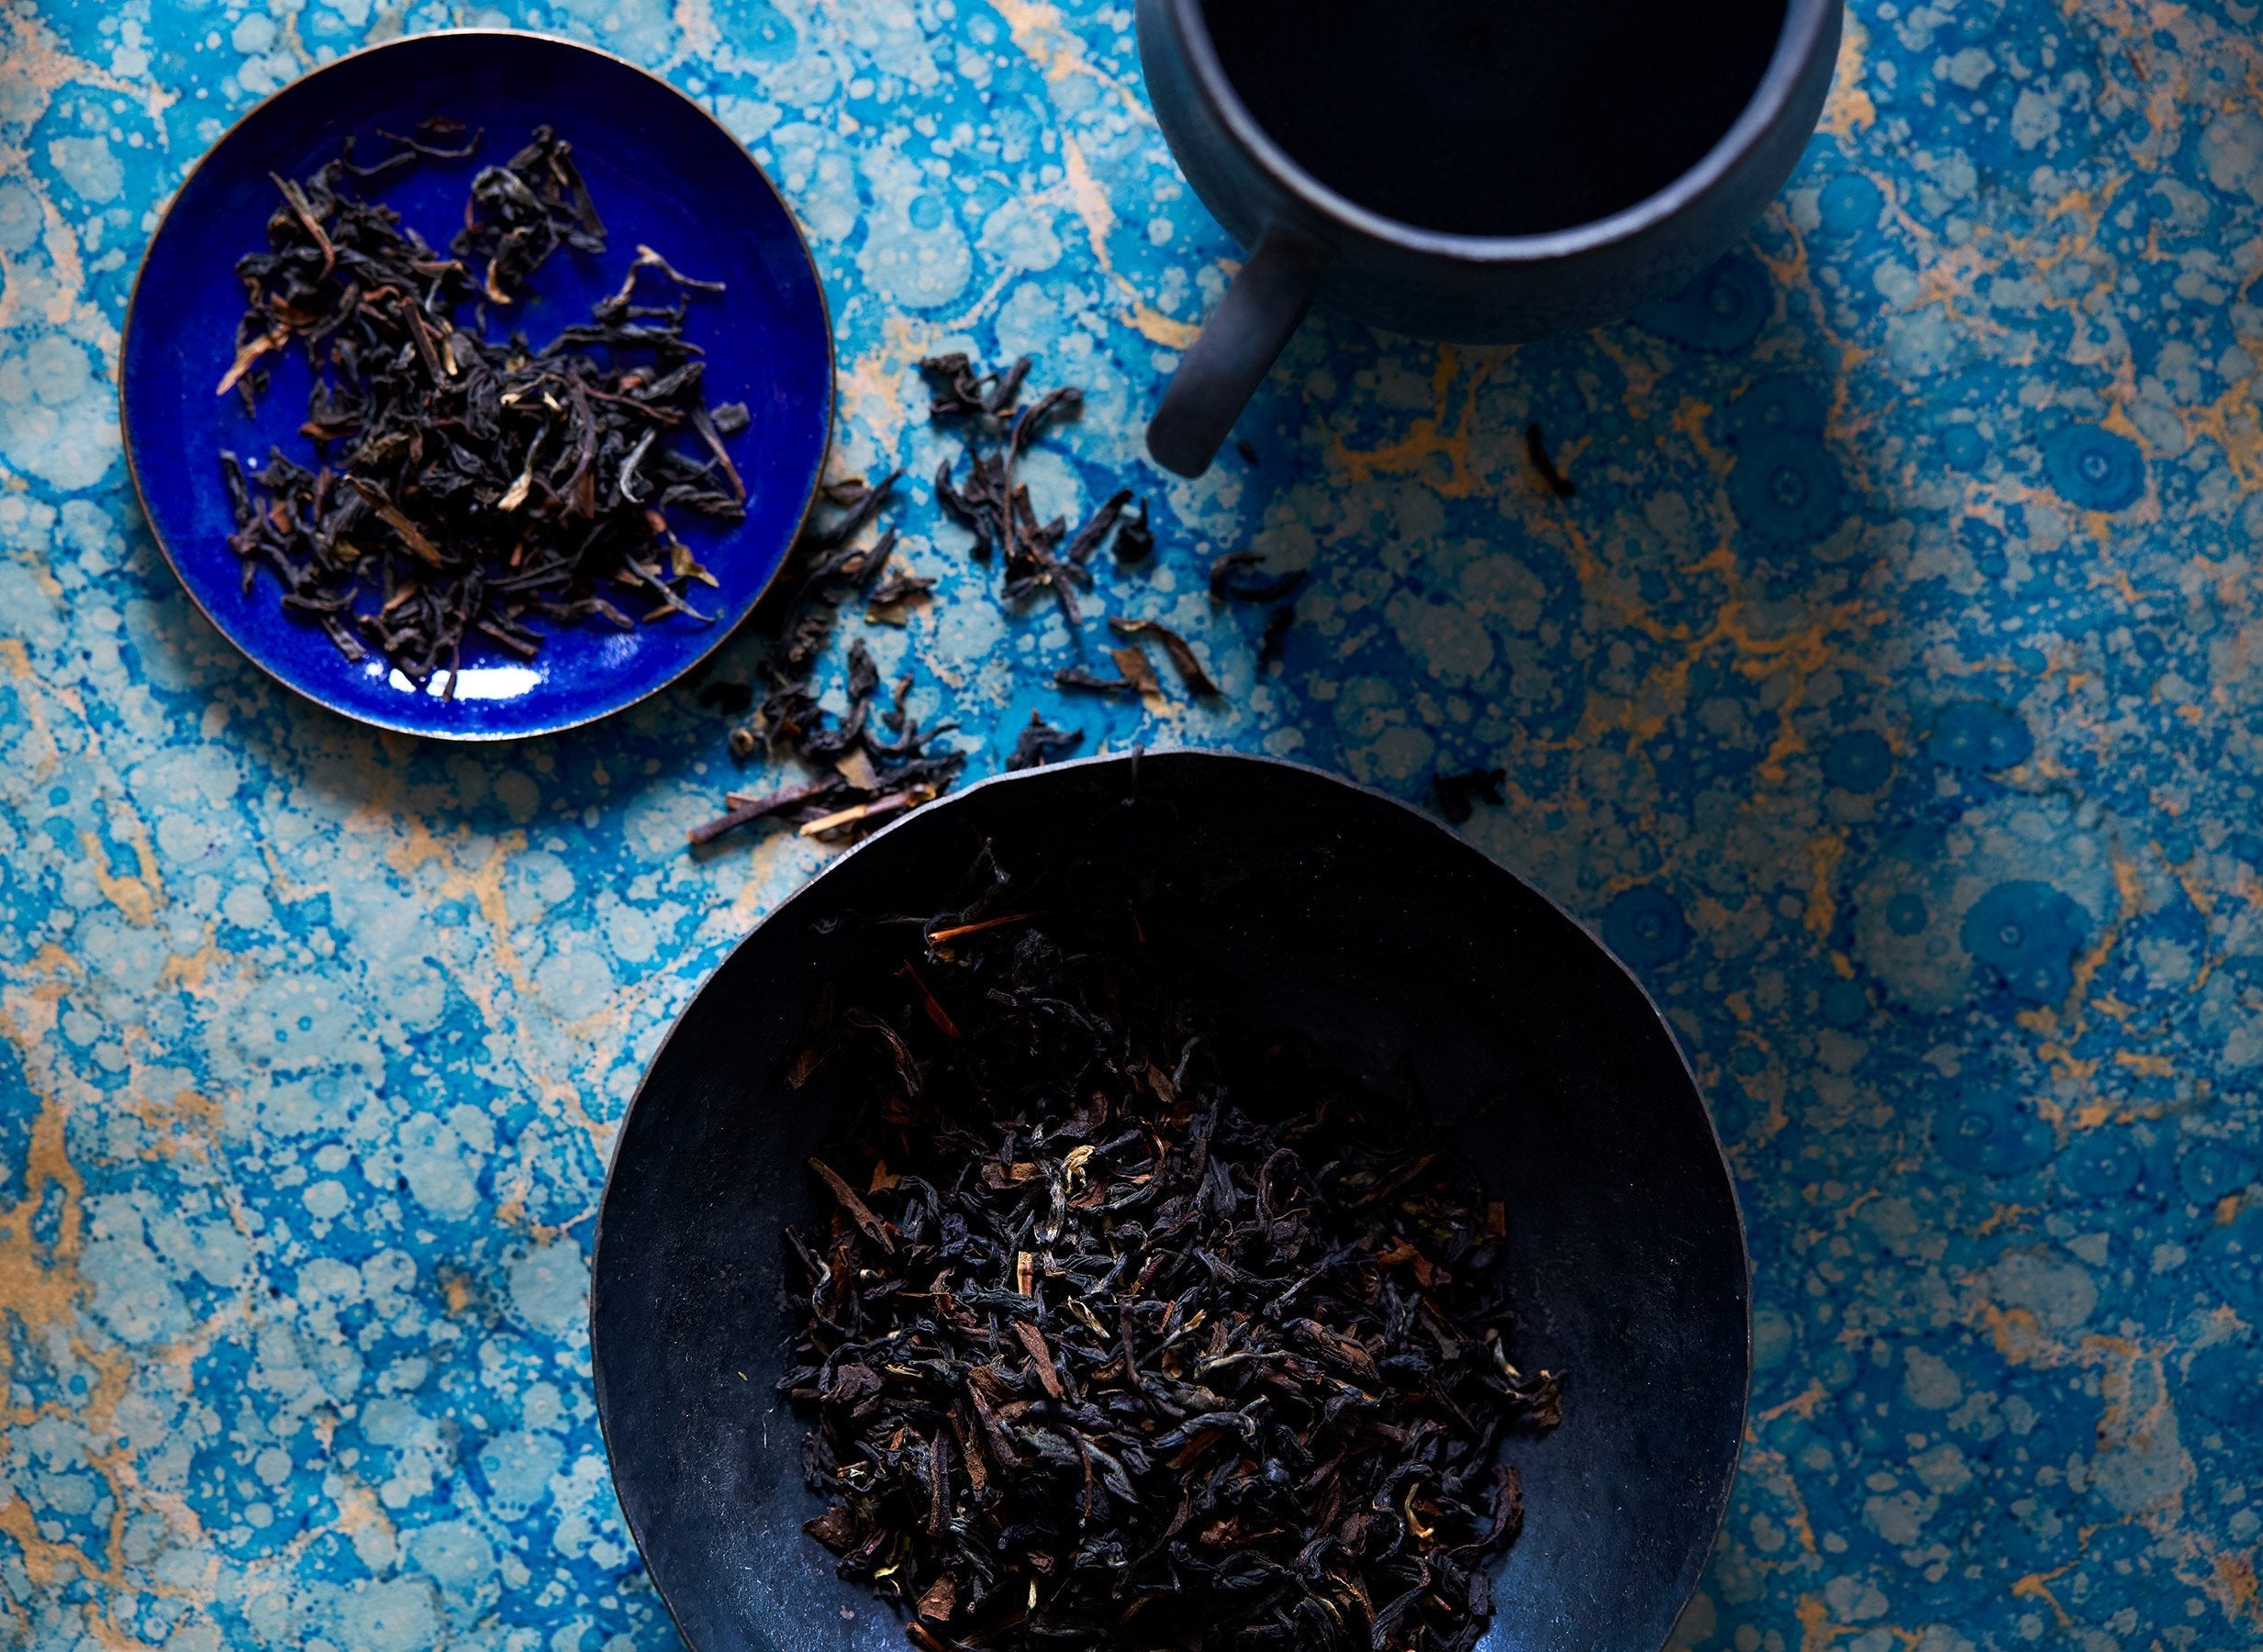 Discover premium loose leaf black tea from BELLOCQ and elevate your everyday rituals. Free U.S. shipping available.